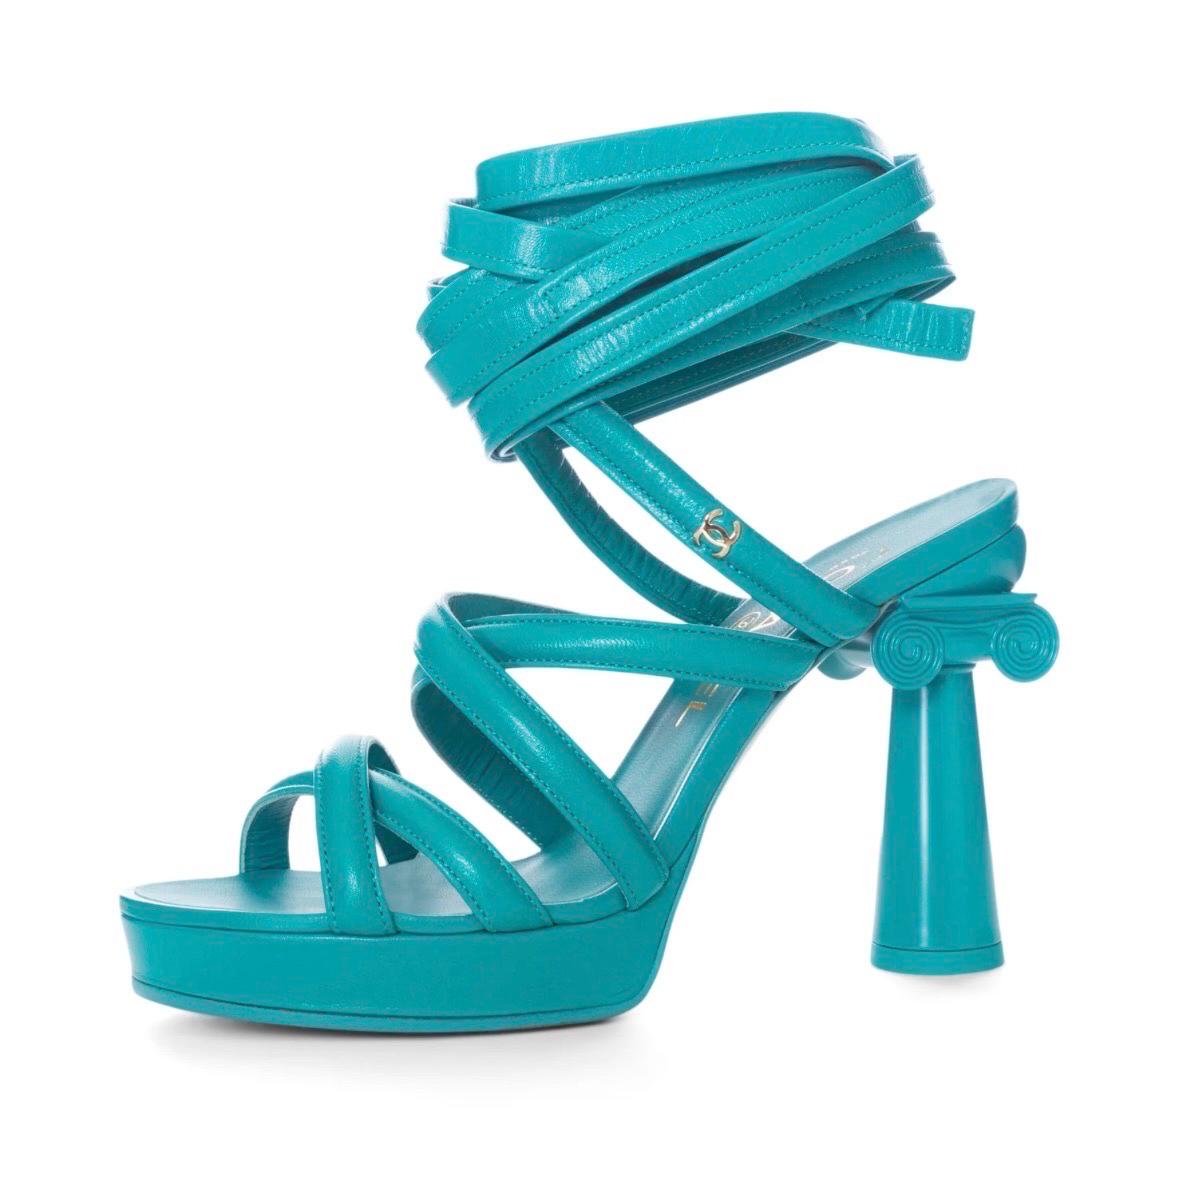 Chanel Turquoise Green Grecian Column Platform Wrap-Up Sandals Cruise 2018 In Good Condition For Sale In Los Angeles, CA